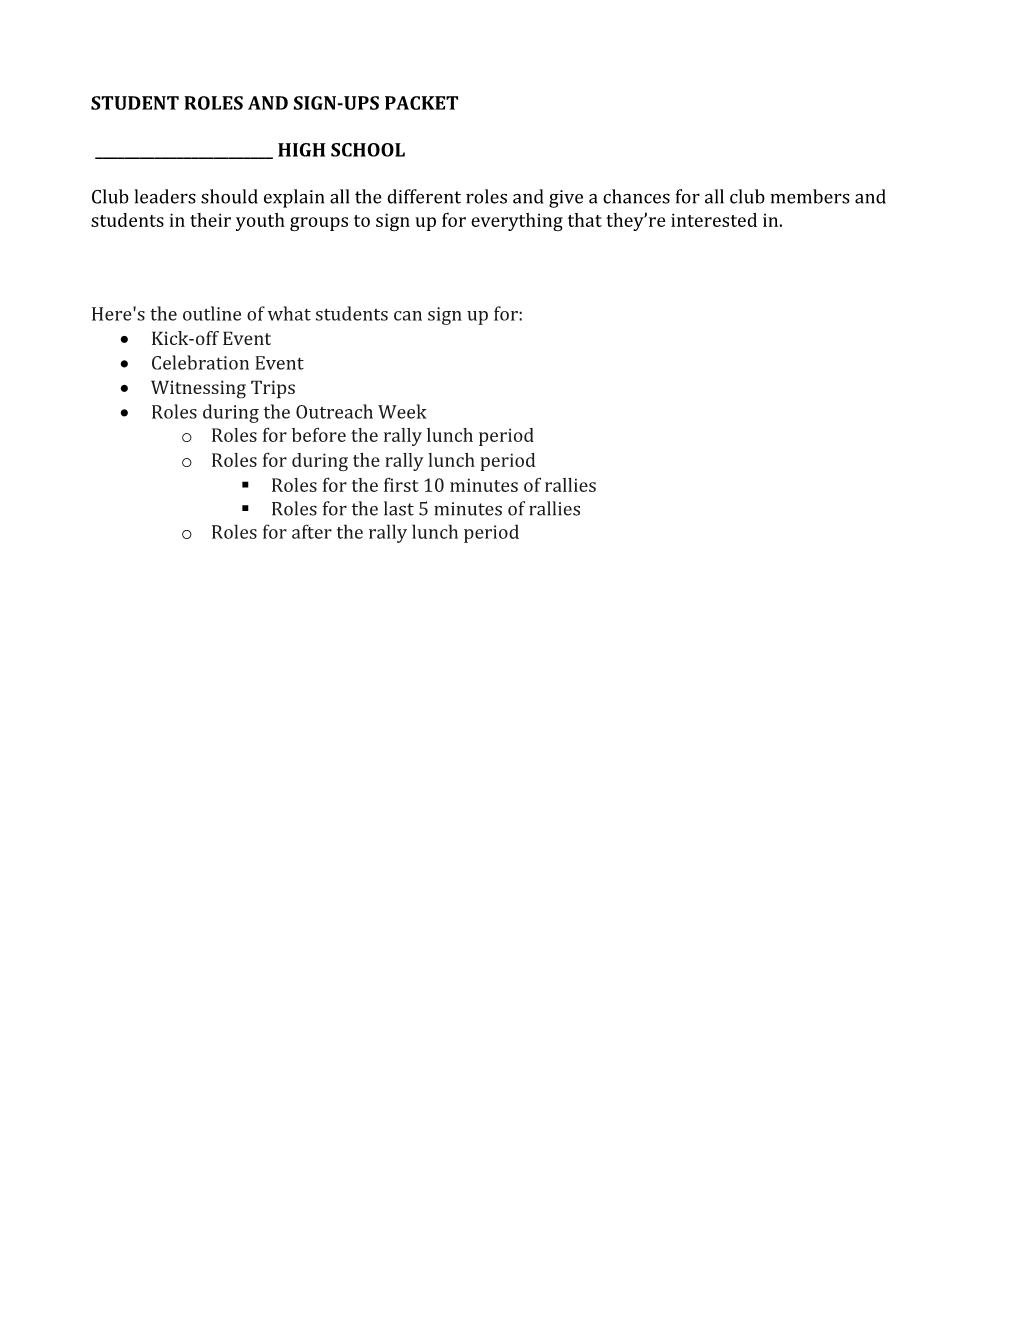 Student Roles and Sign-Ups Packet